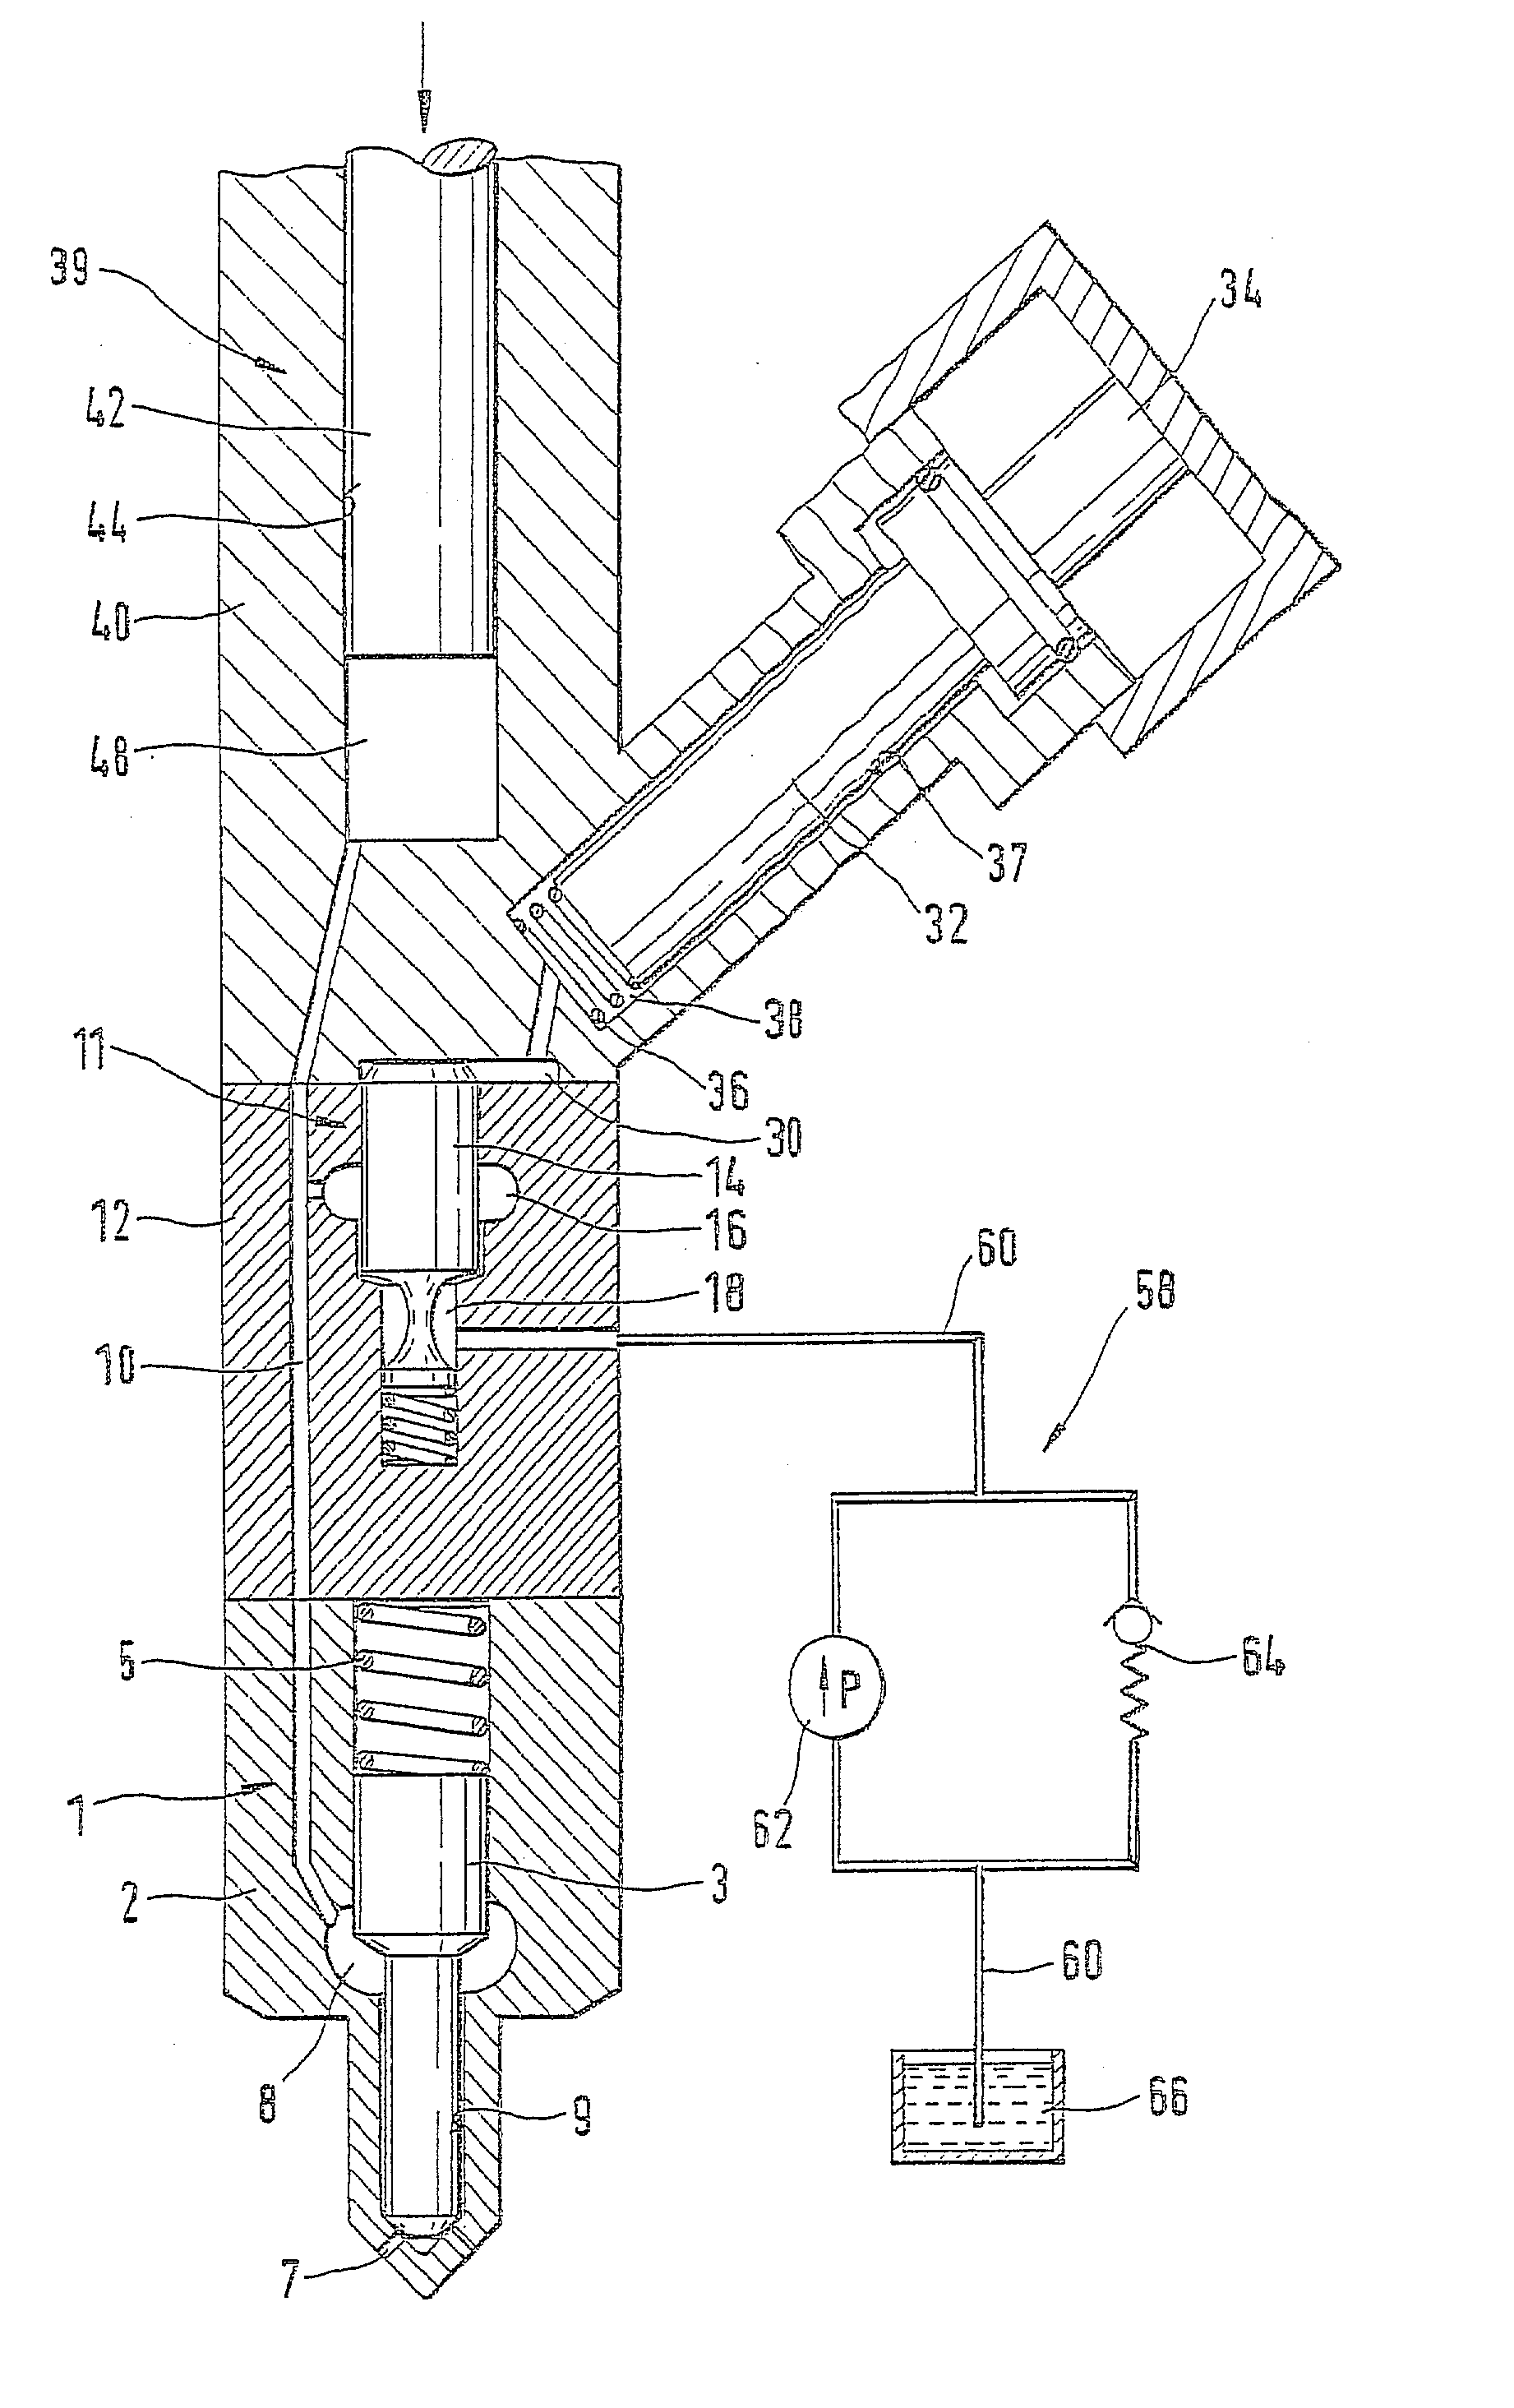 Fuel injection apparatus for an internal combustion engine